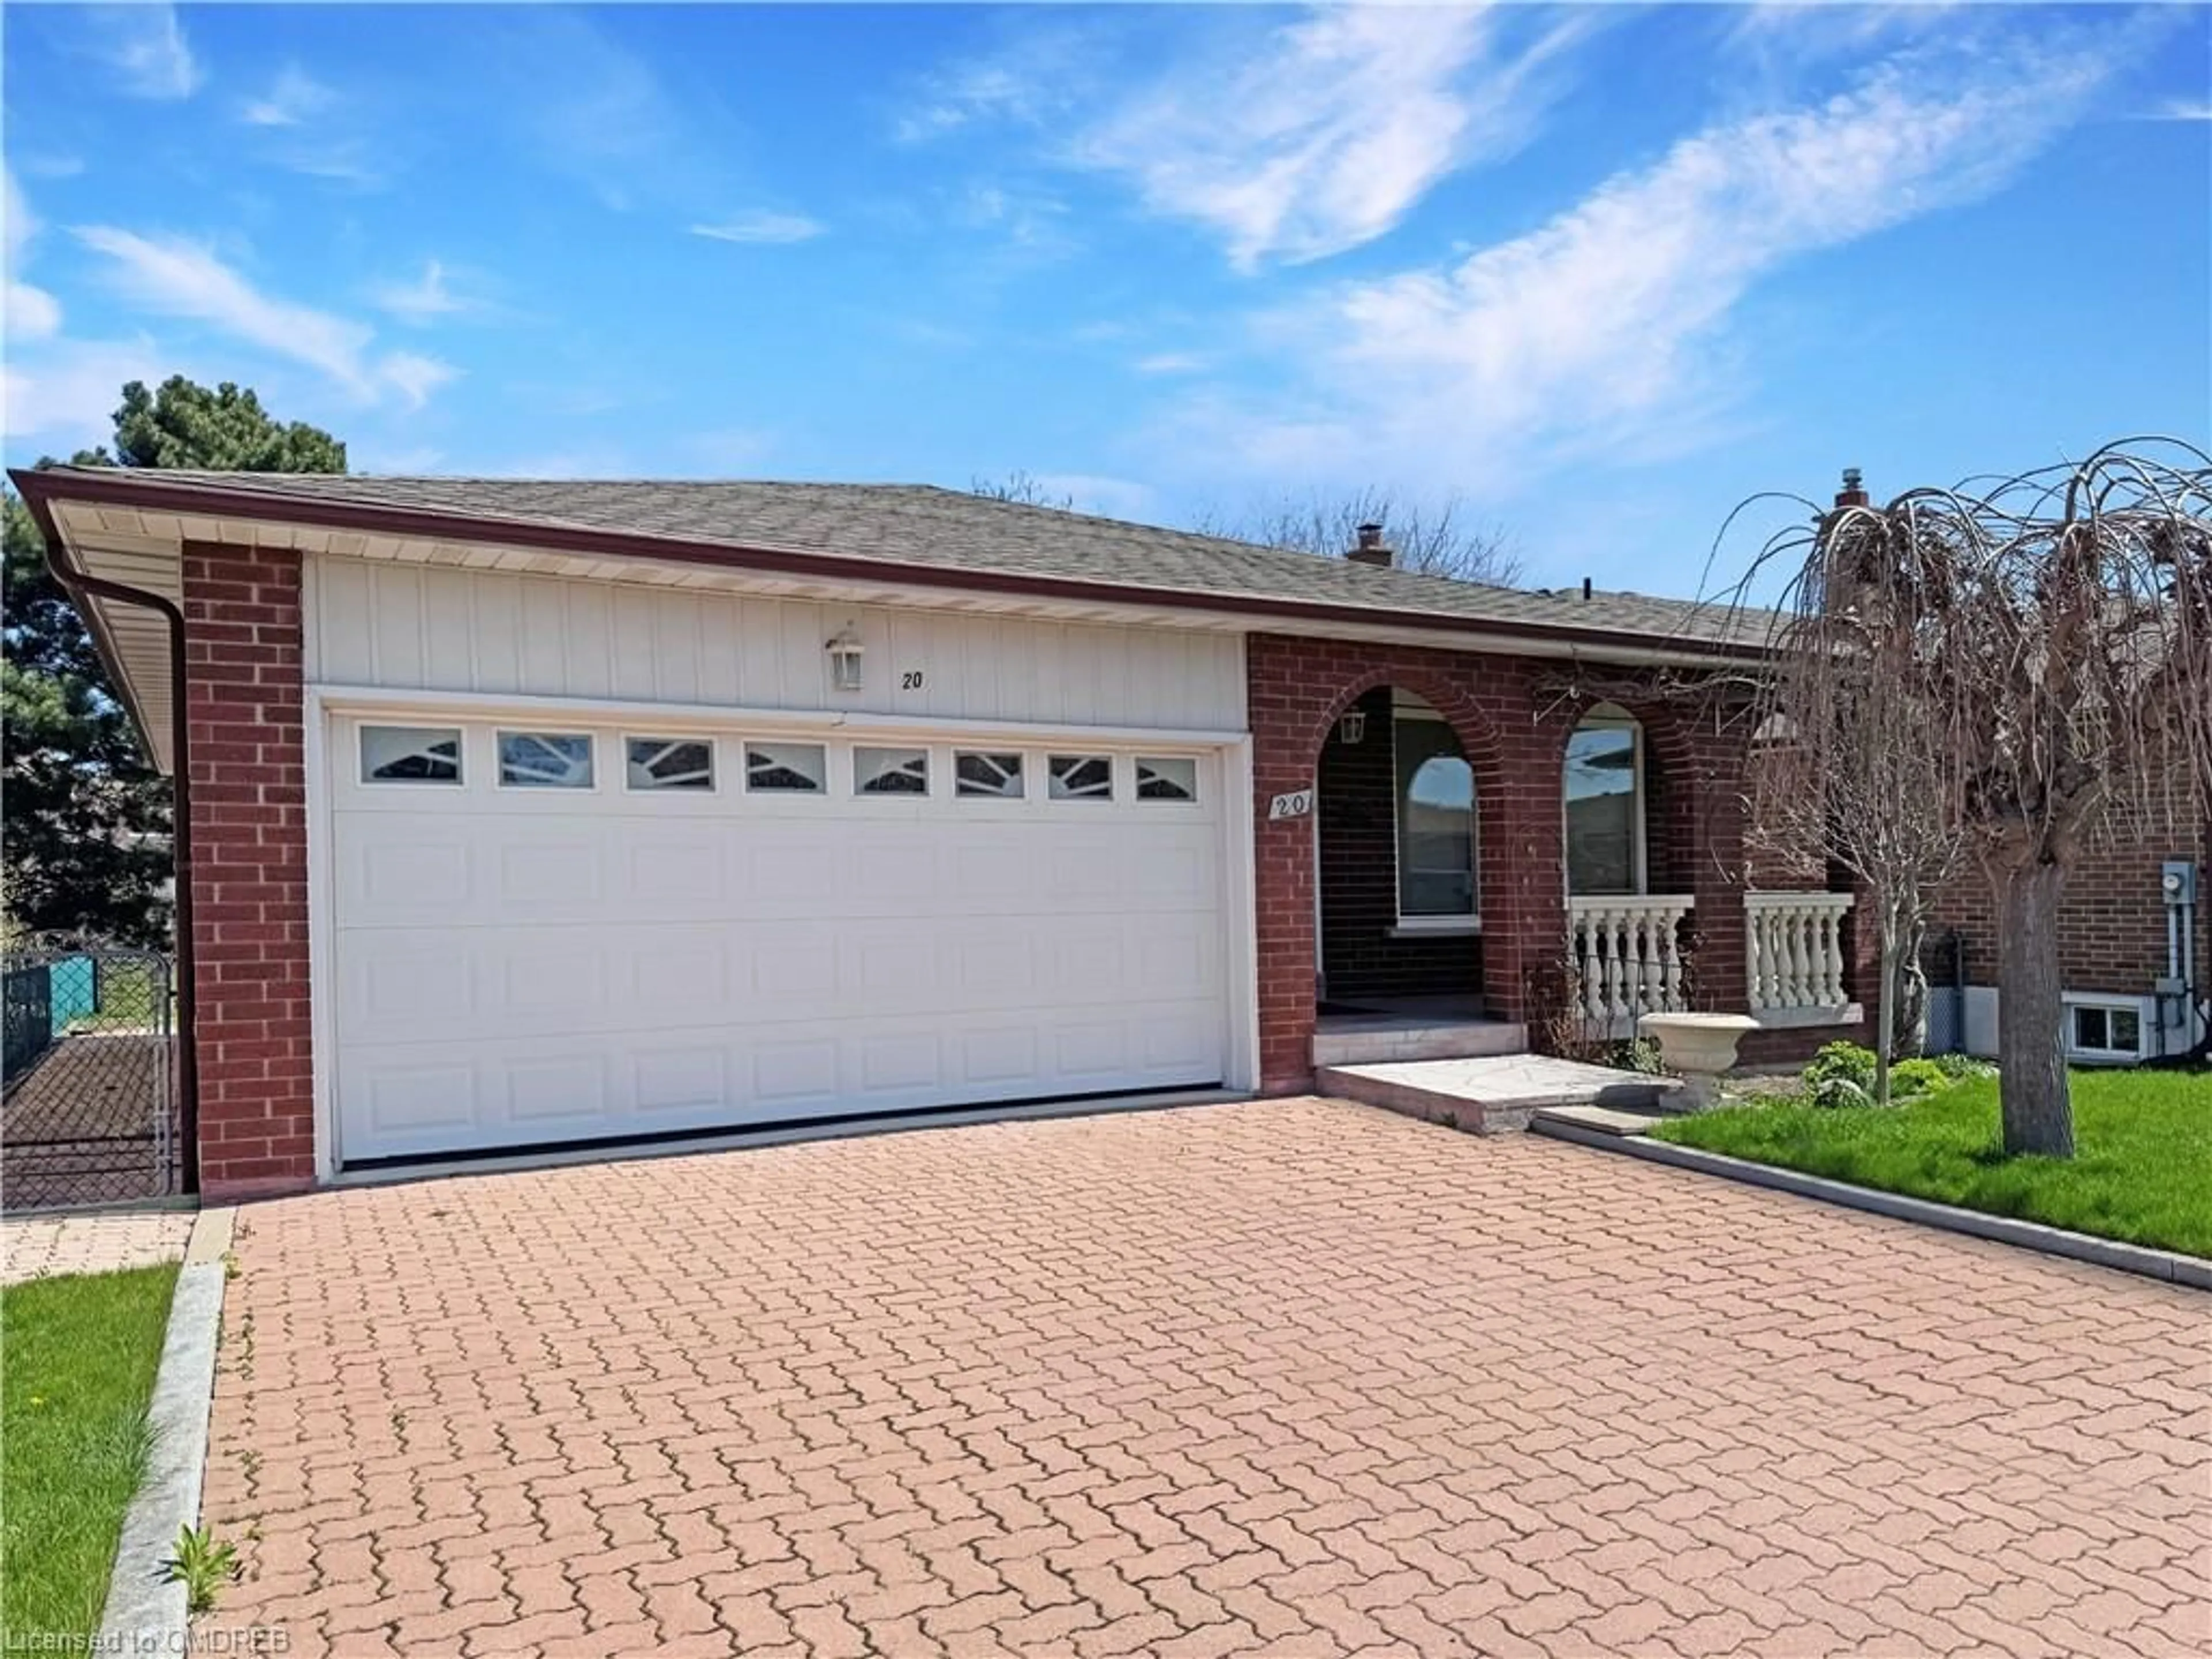 Home with brick exterior material for 20 Leander St, Brampton Ontario L6S 3M6